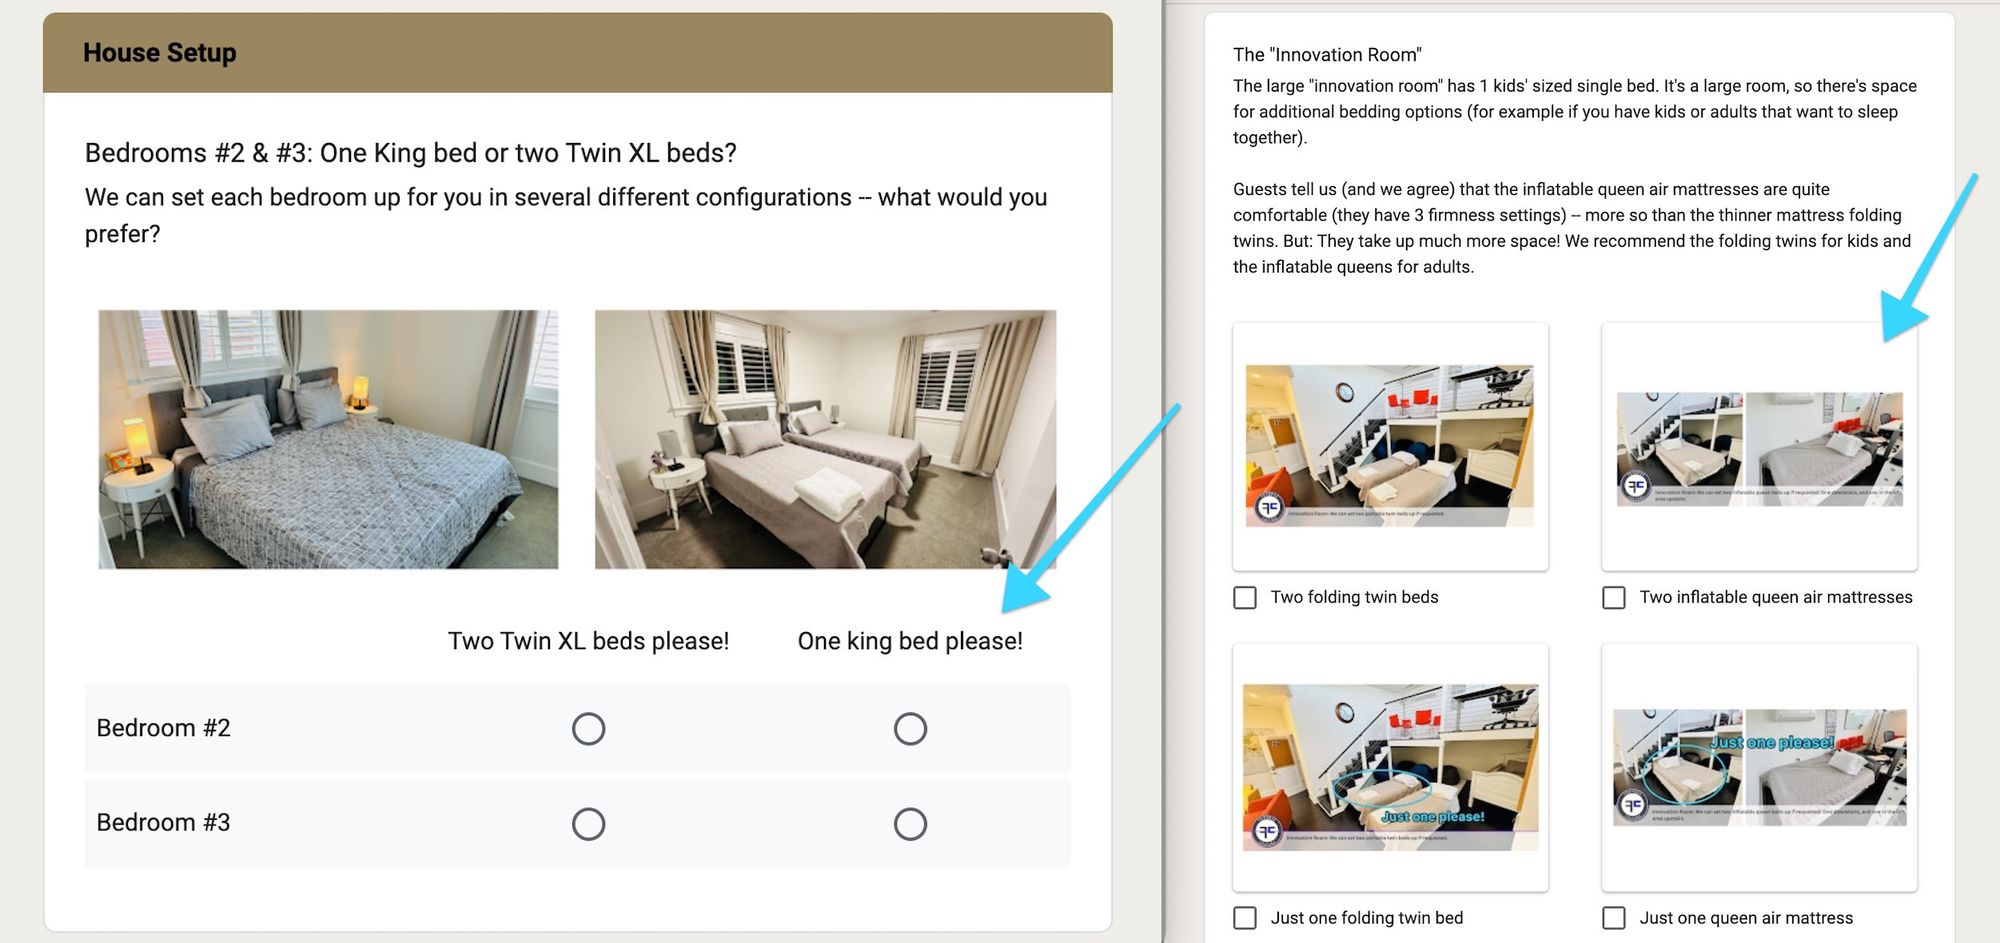 How I'm using AI as an Airbnb host to generate in-depth 5 star reviews from guests